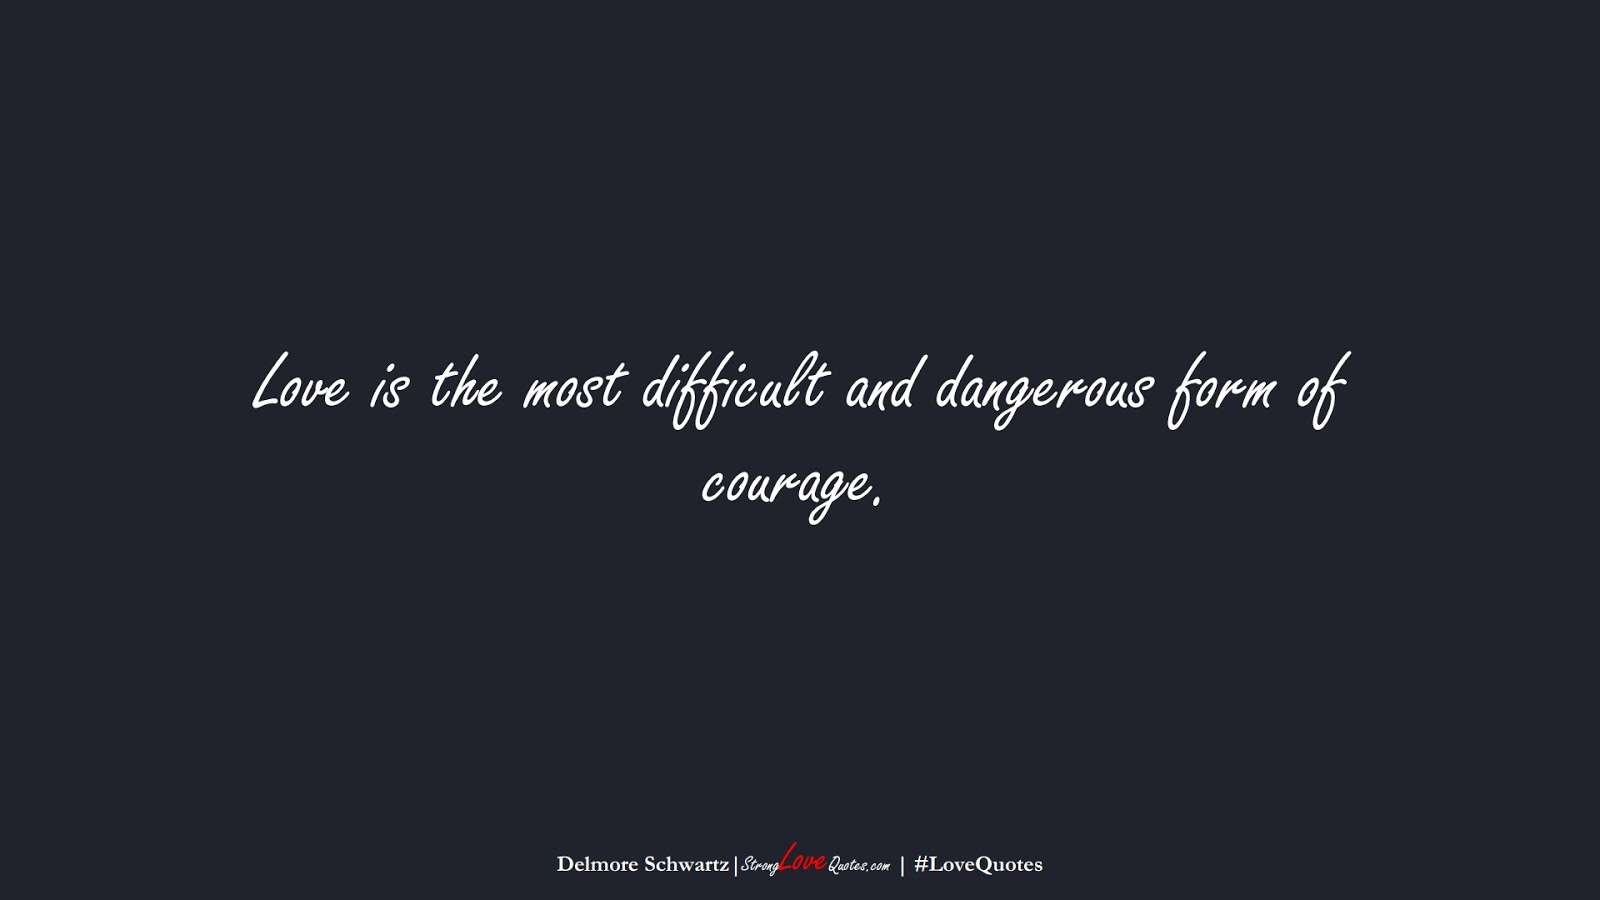 Love is the most difficult and dangerous form of courage. (Delmore Schwartz);  #LoveQuotes